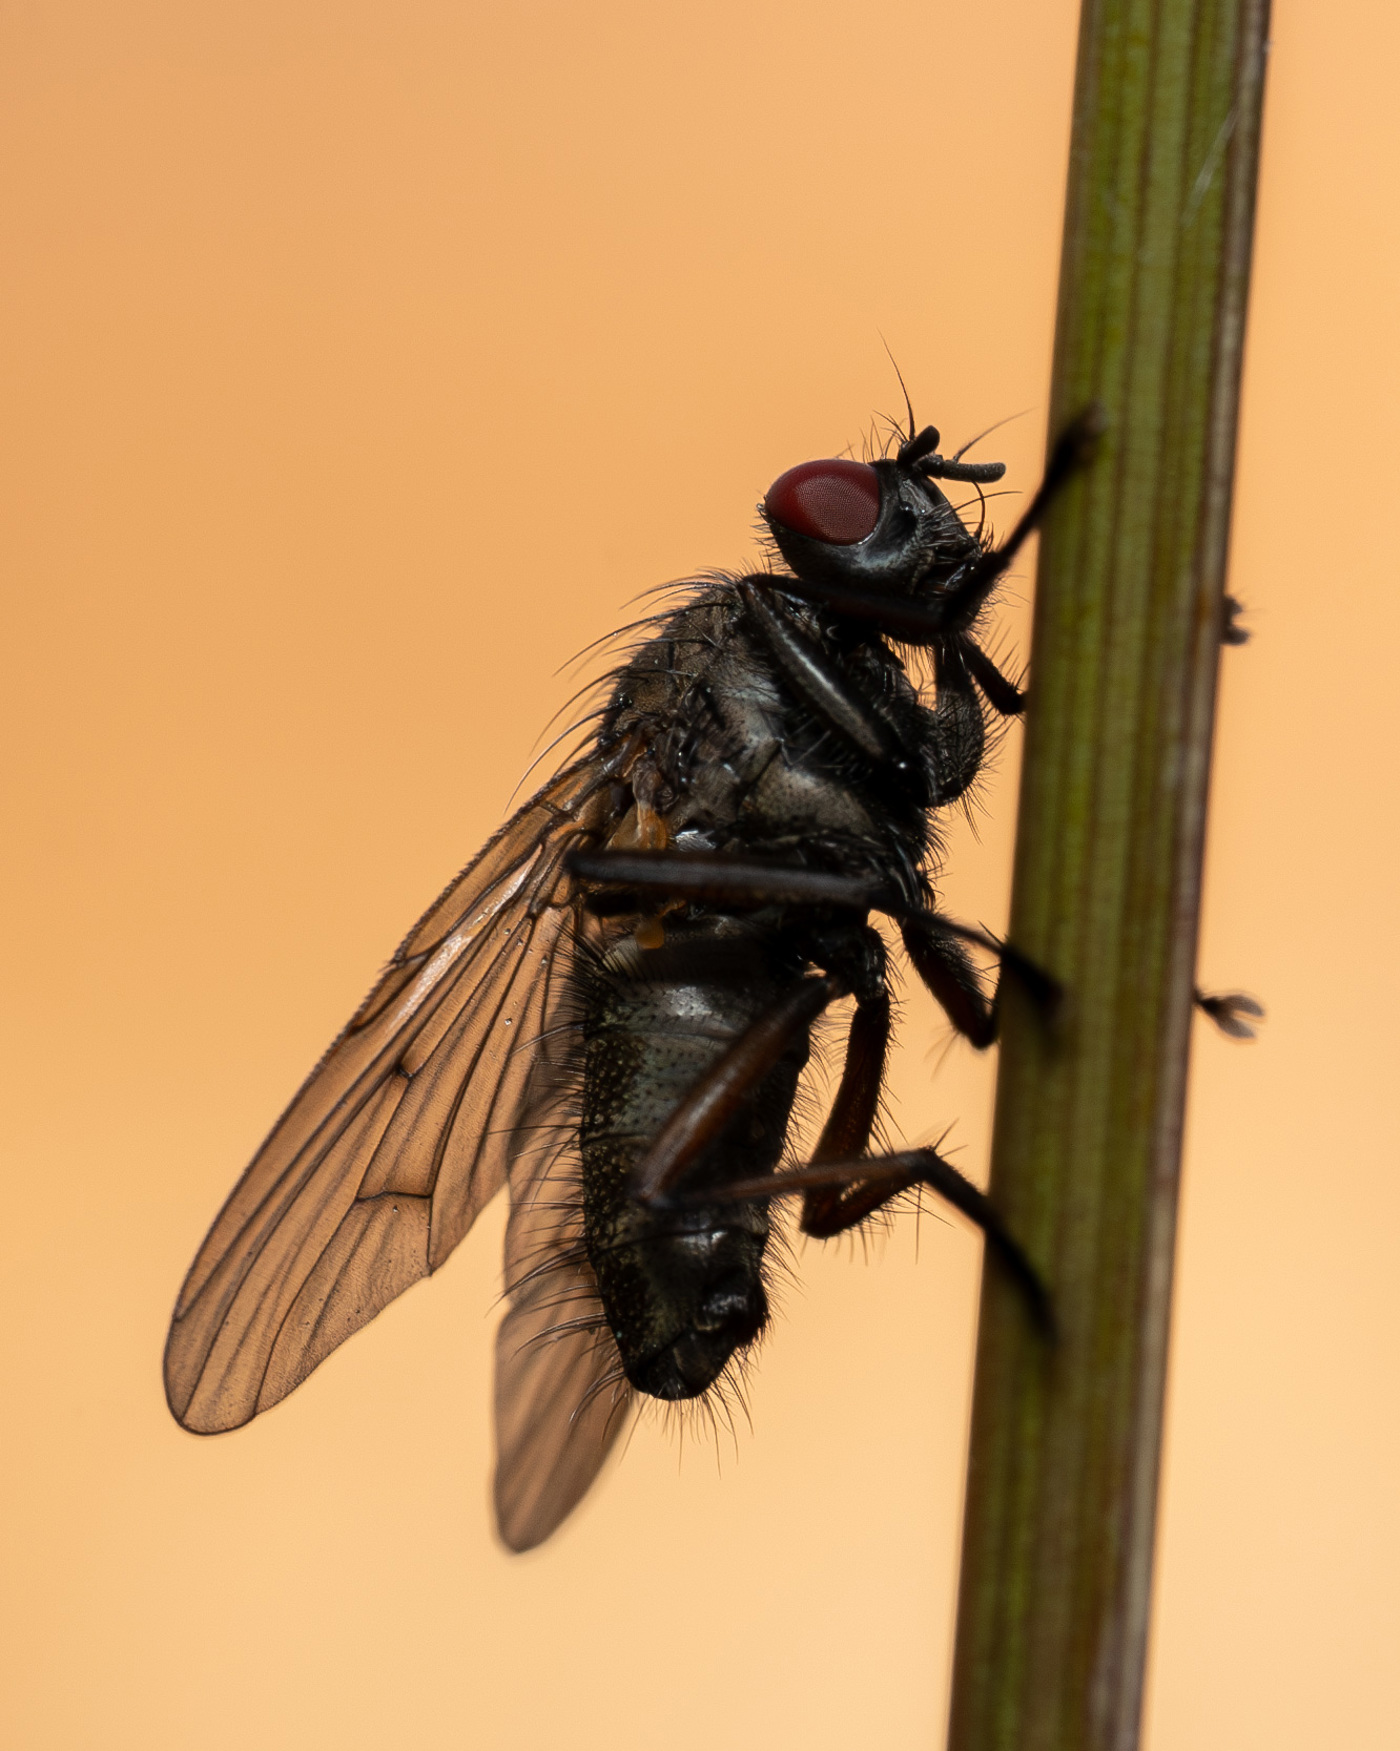  a close up of a fly